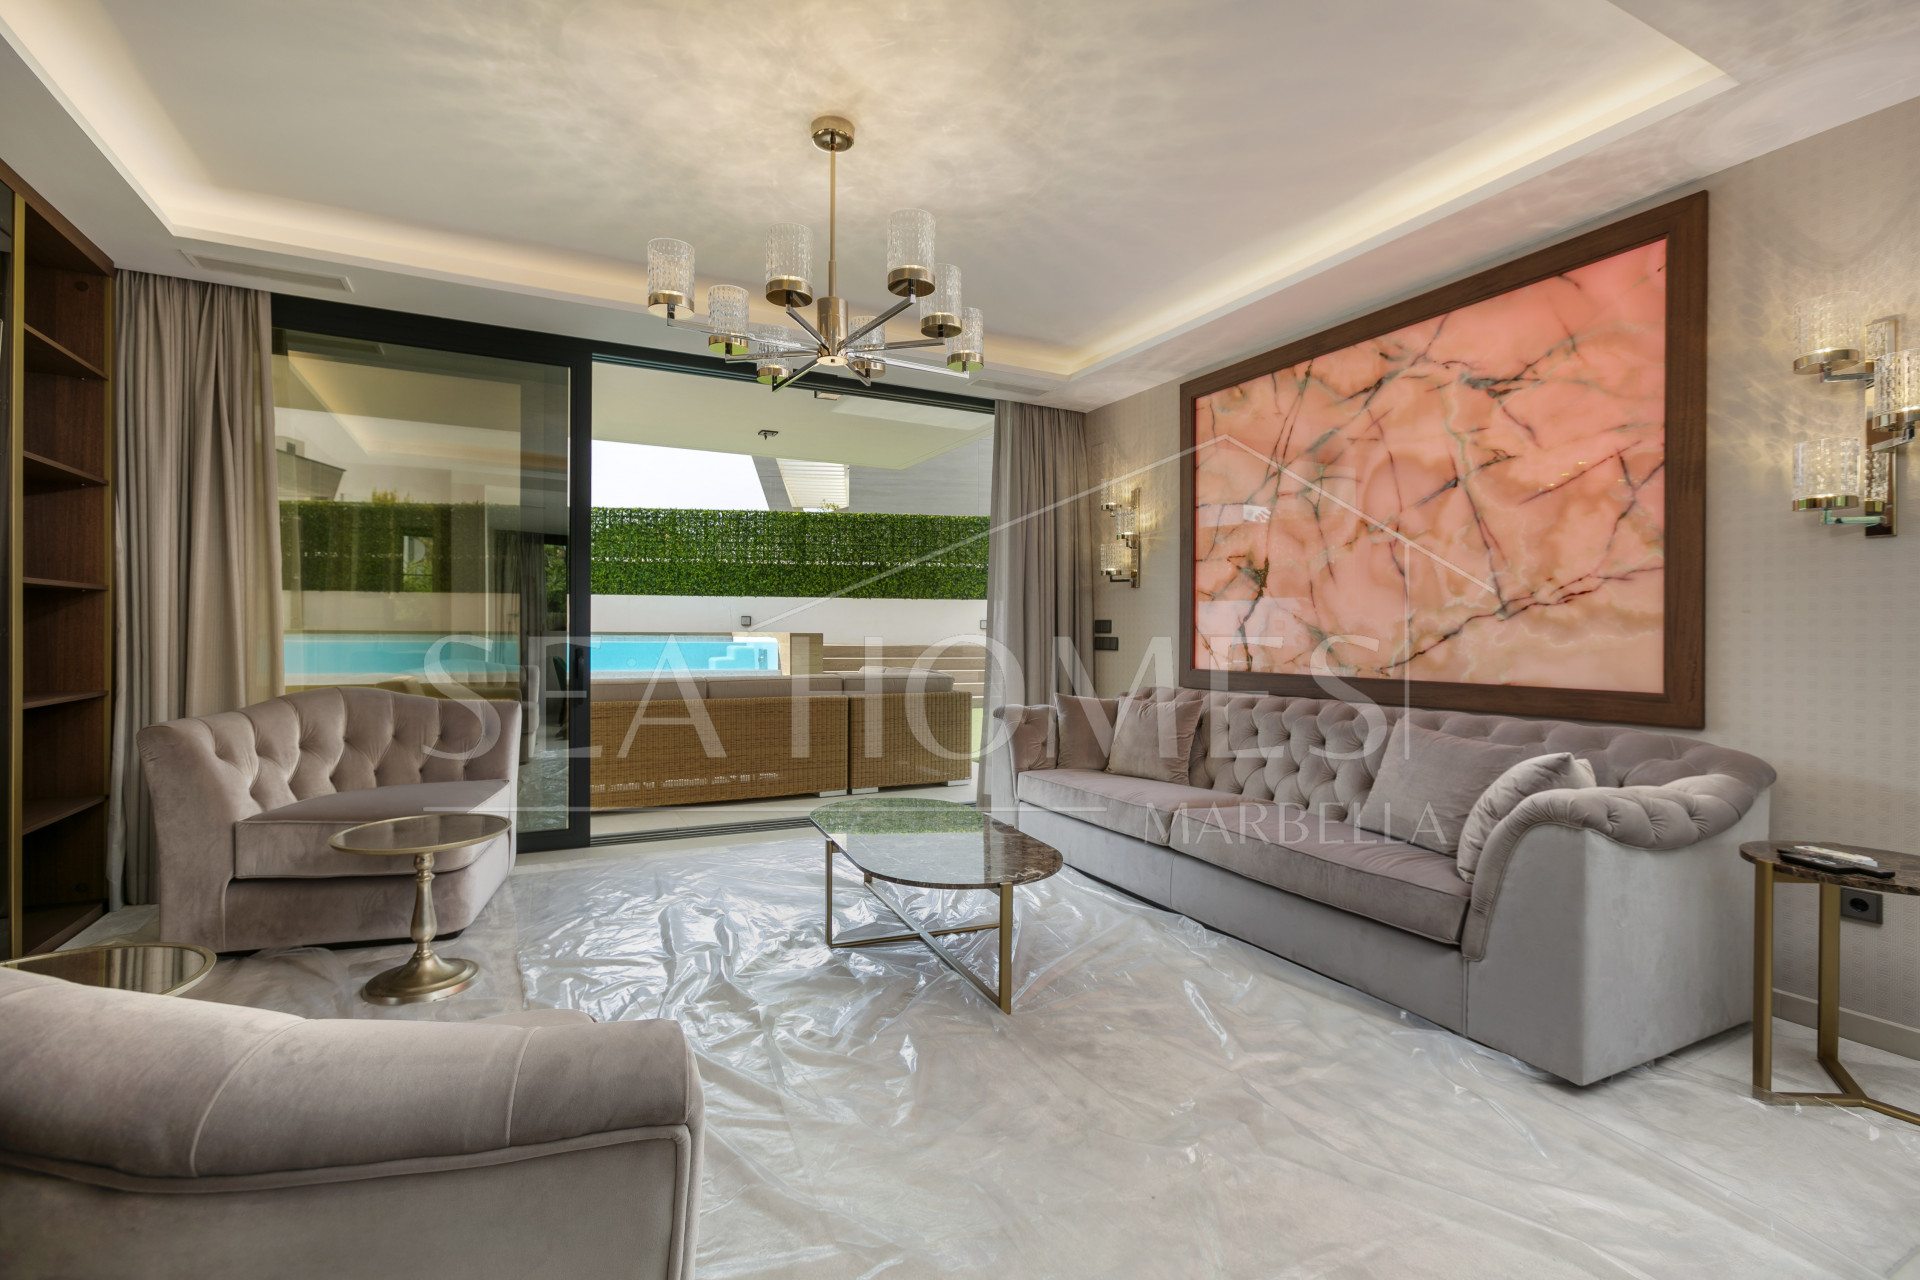 Magnificent brand new modern six bedroom villa in Puerto Banus, just 300m to the beach and all amenties